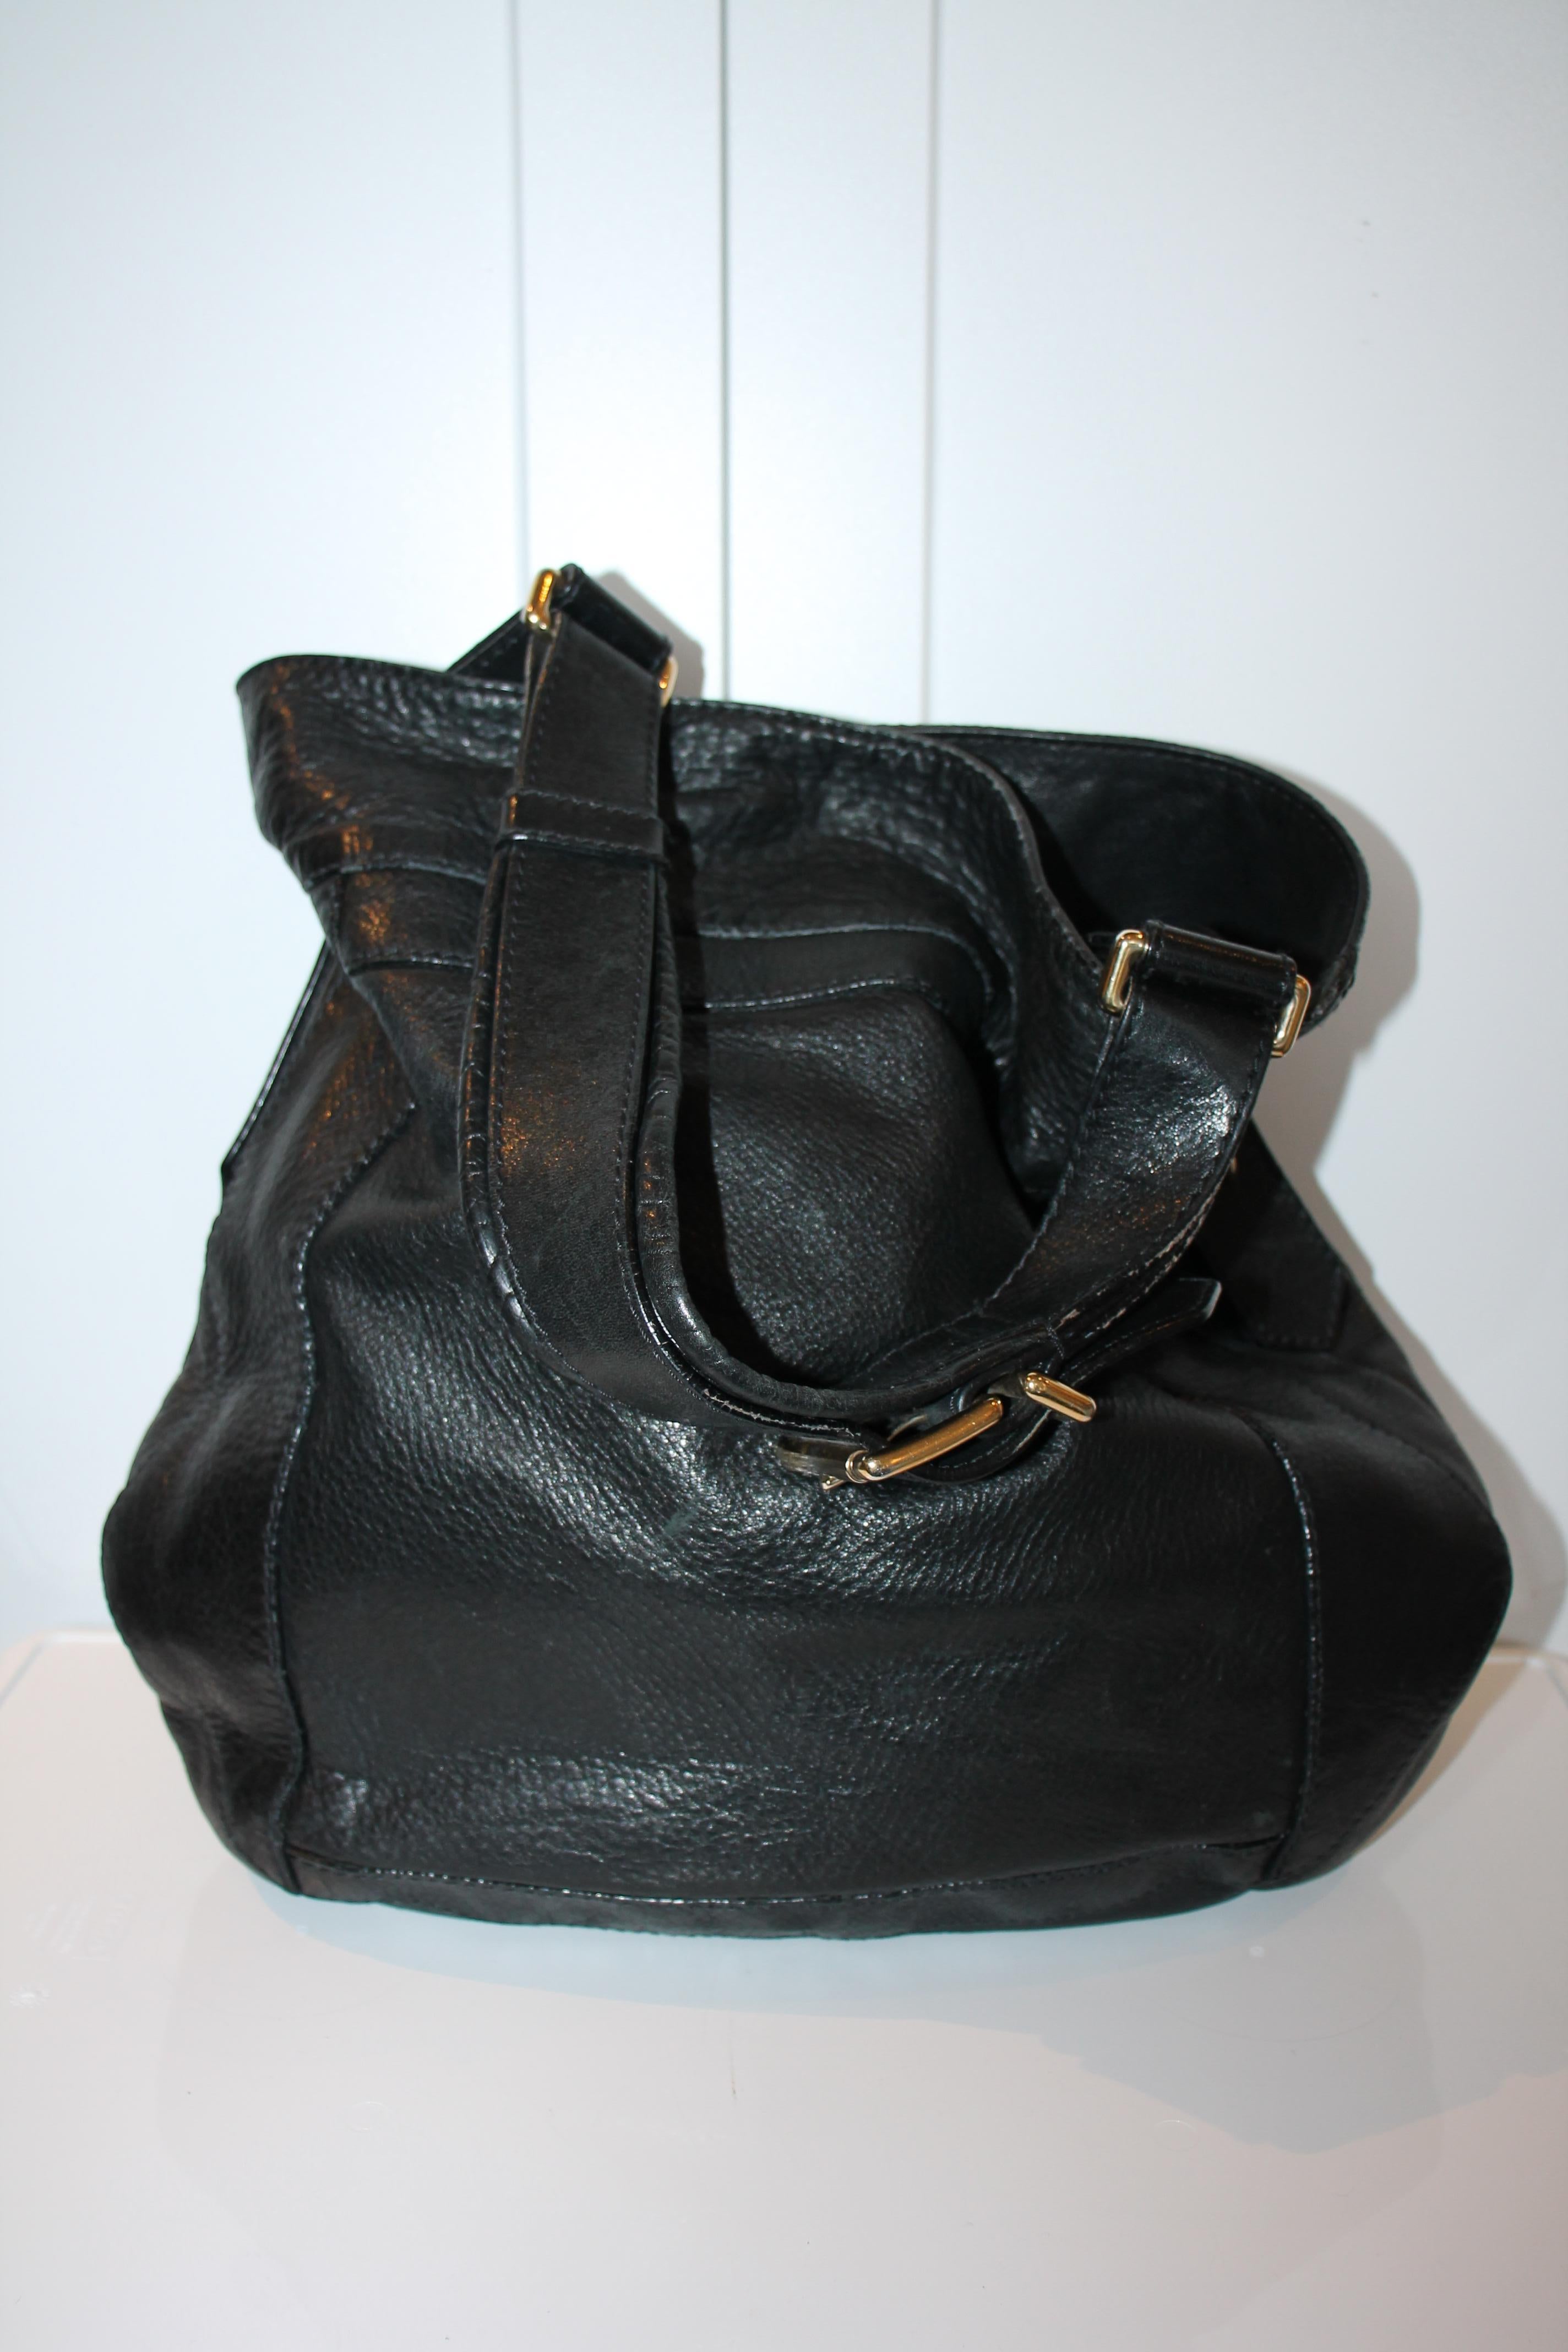 Givenchy Leather Tote In Good Condition For Sale In Roslyn, NY